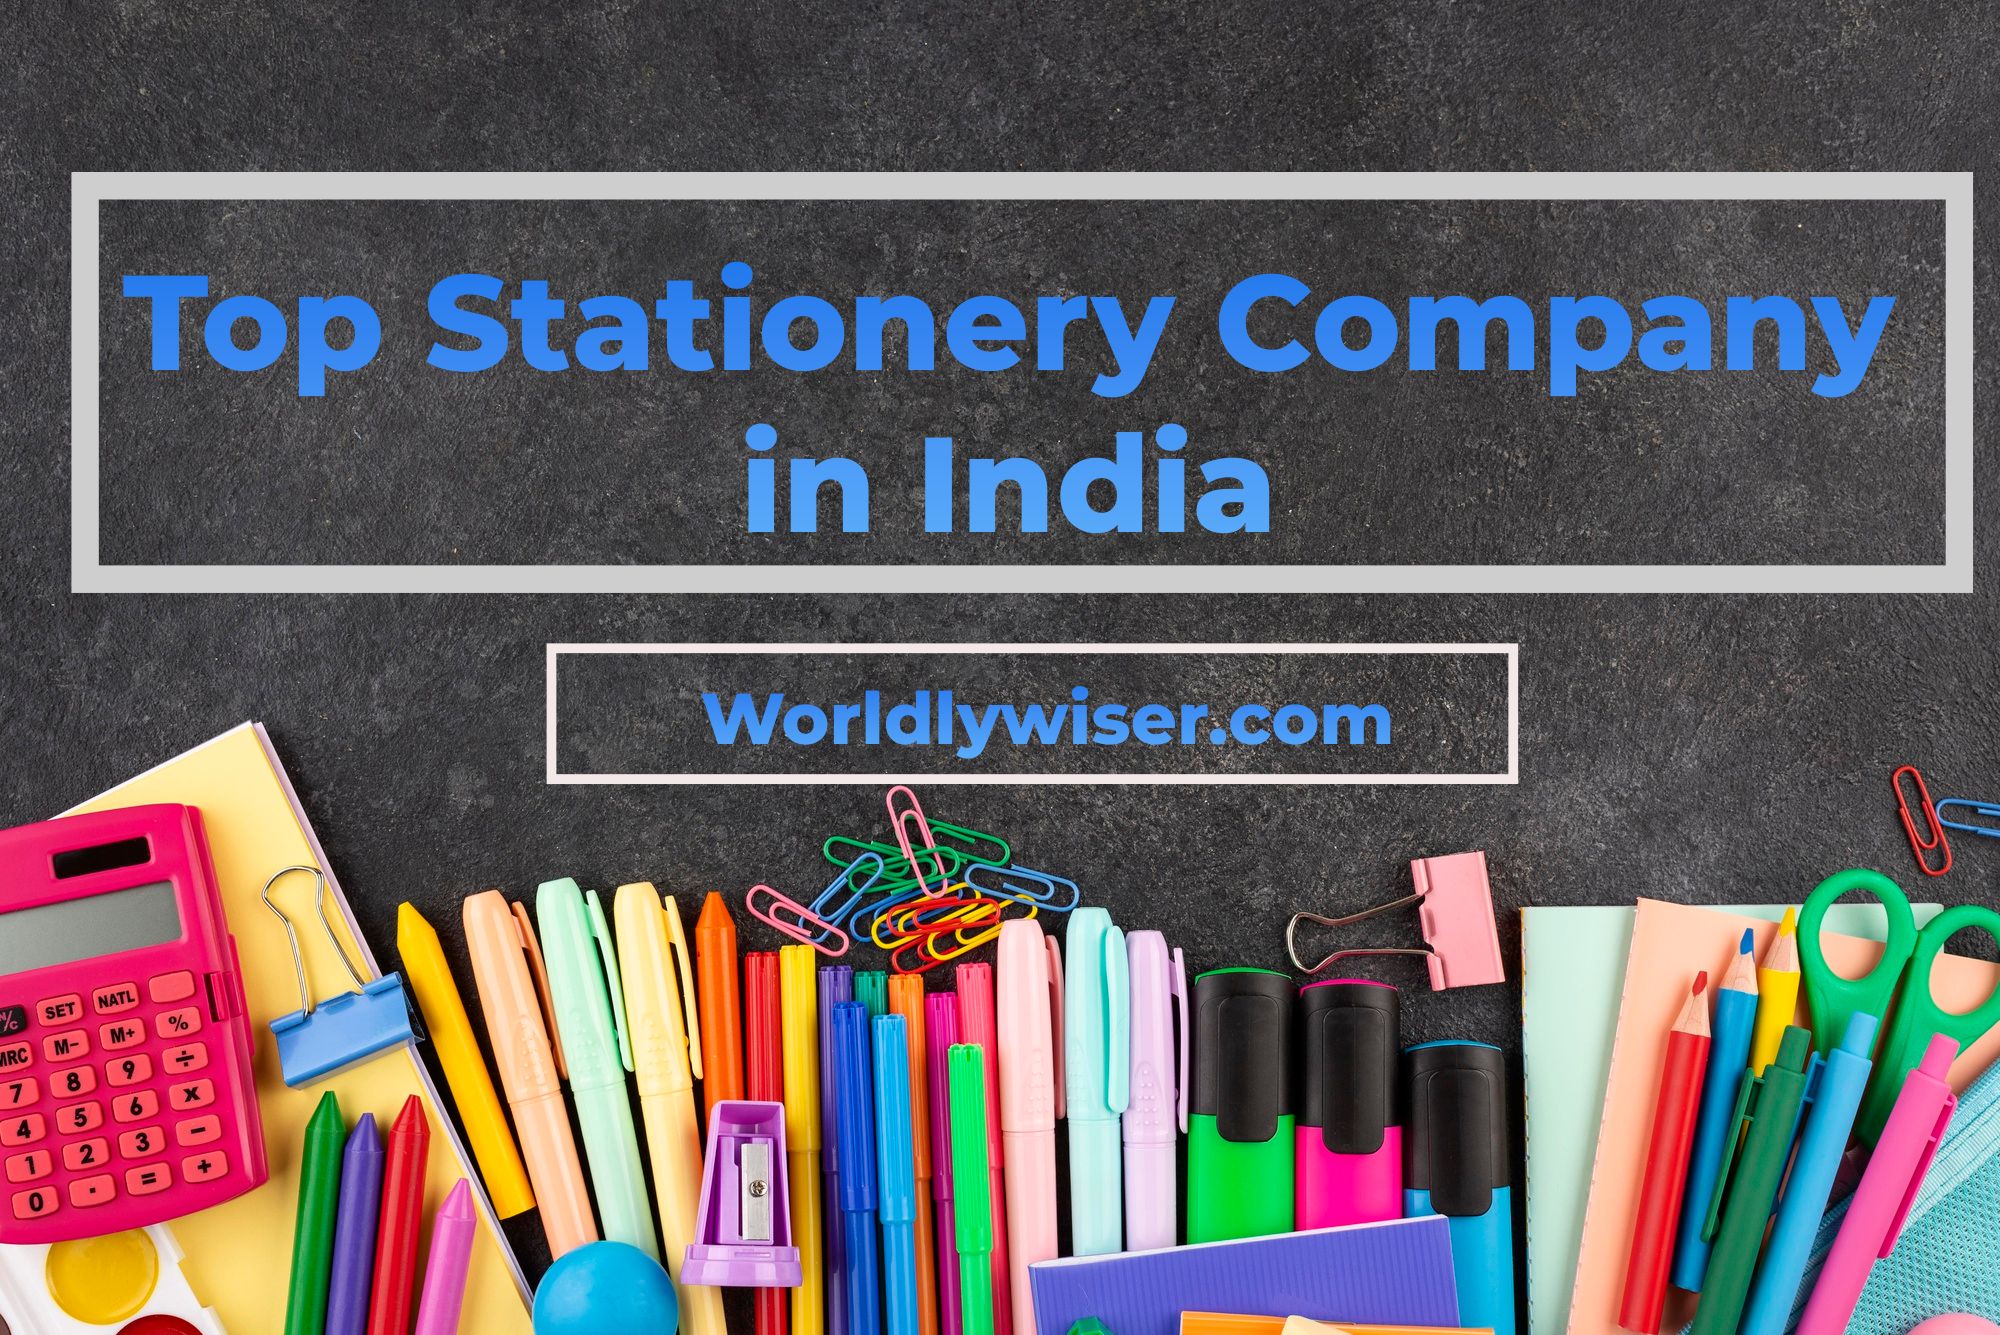 Top Stationery Company in India